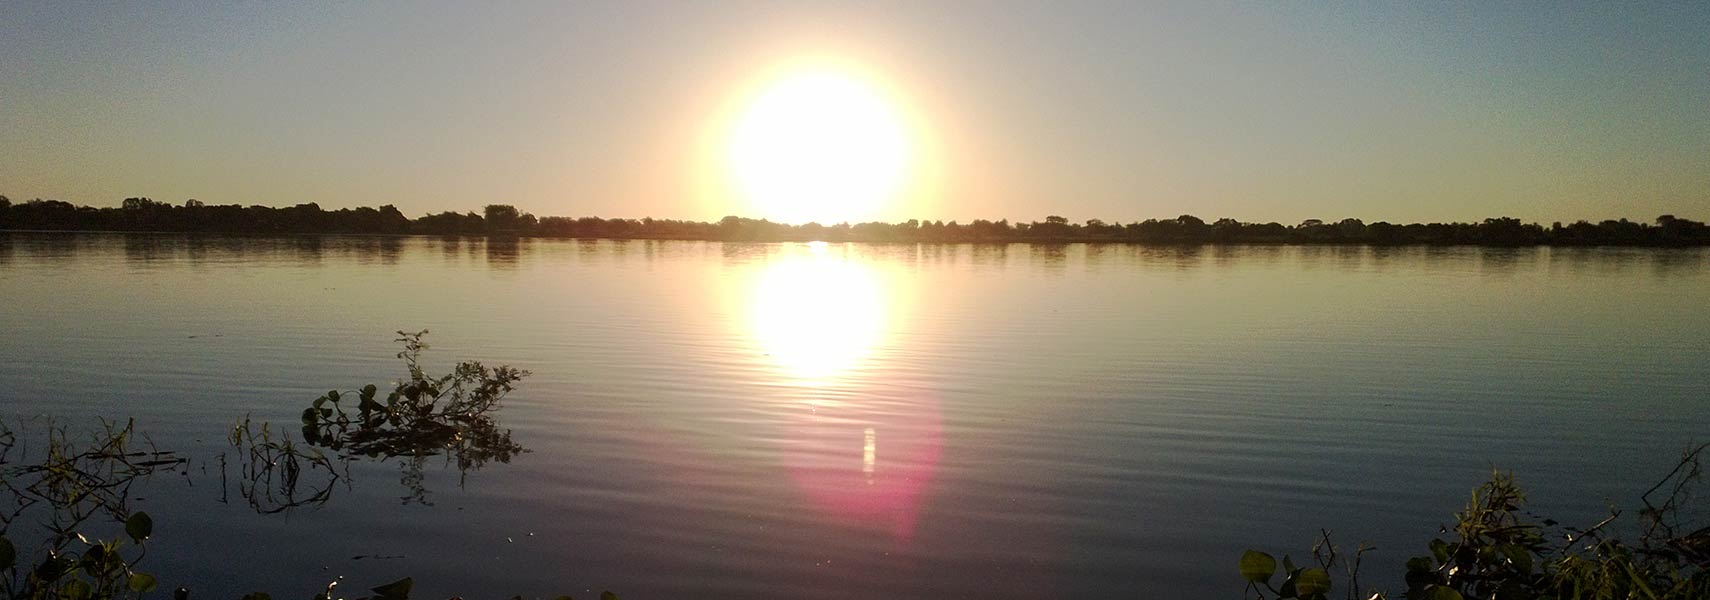 Sunset at Paraguay river, Paraguay